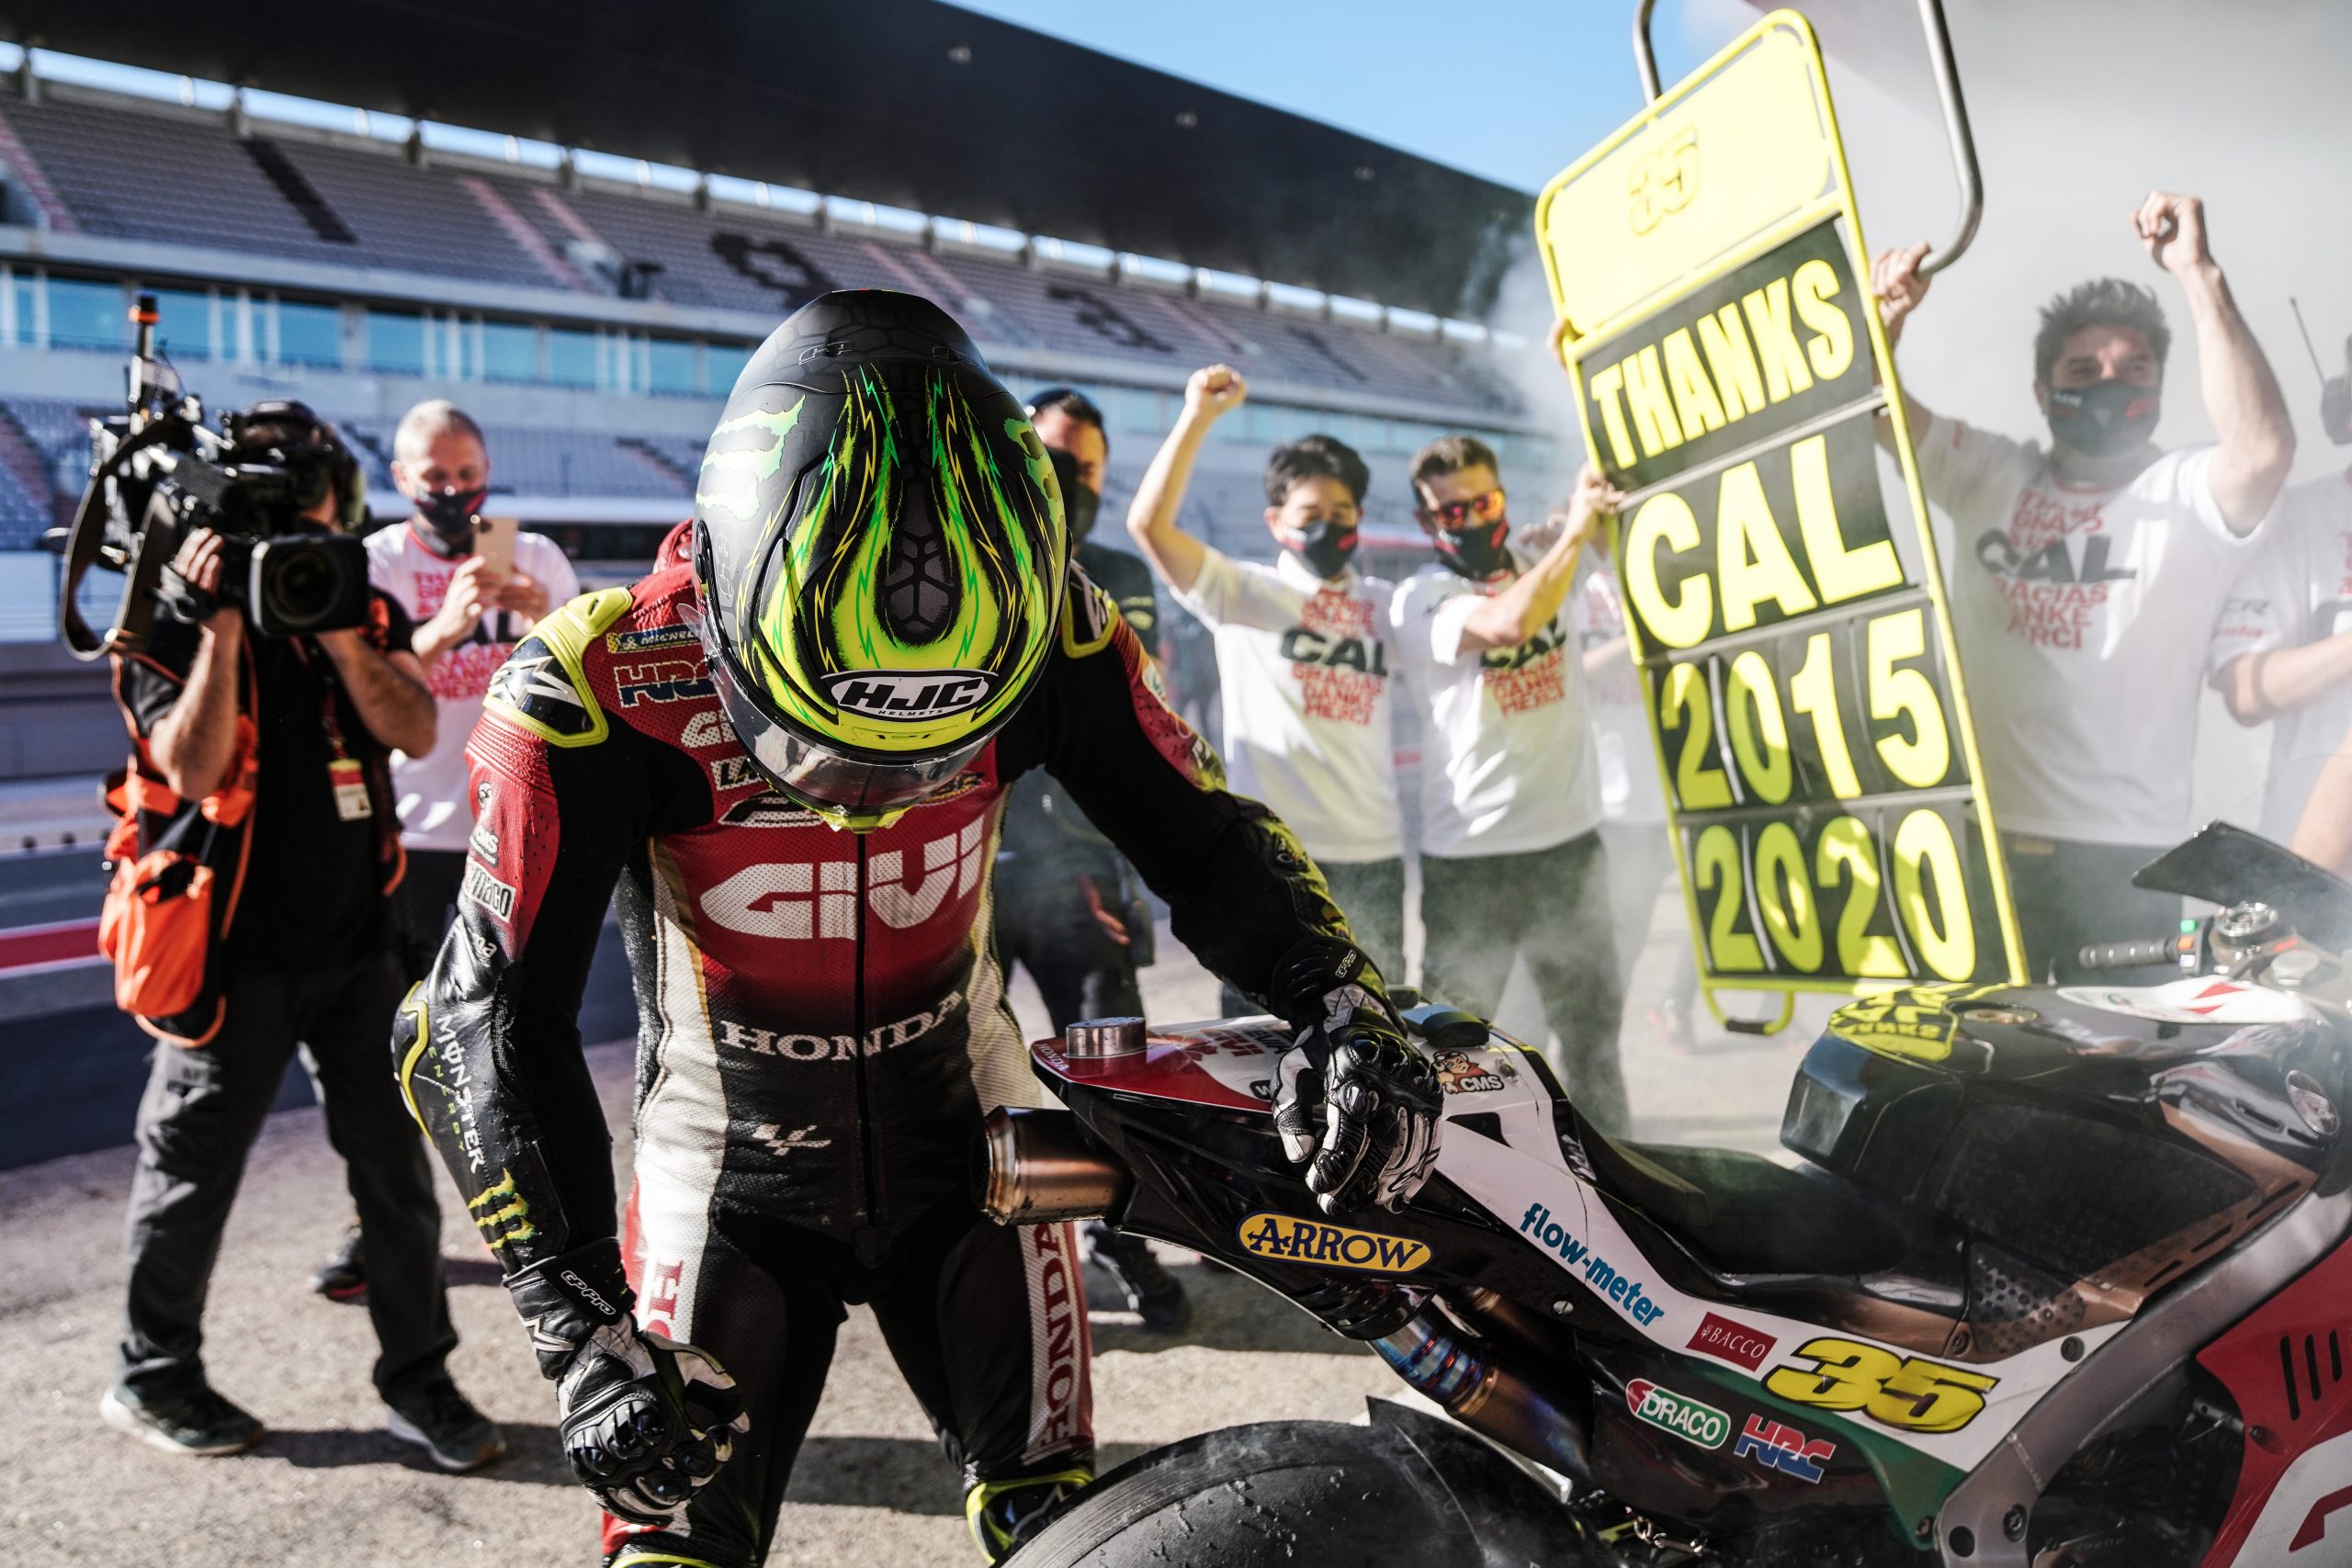 Crutchlow signs off with points finish in Portimao